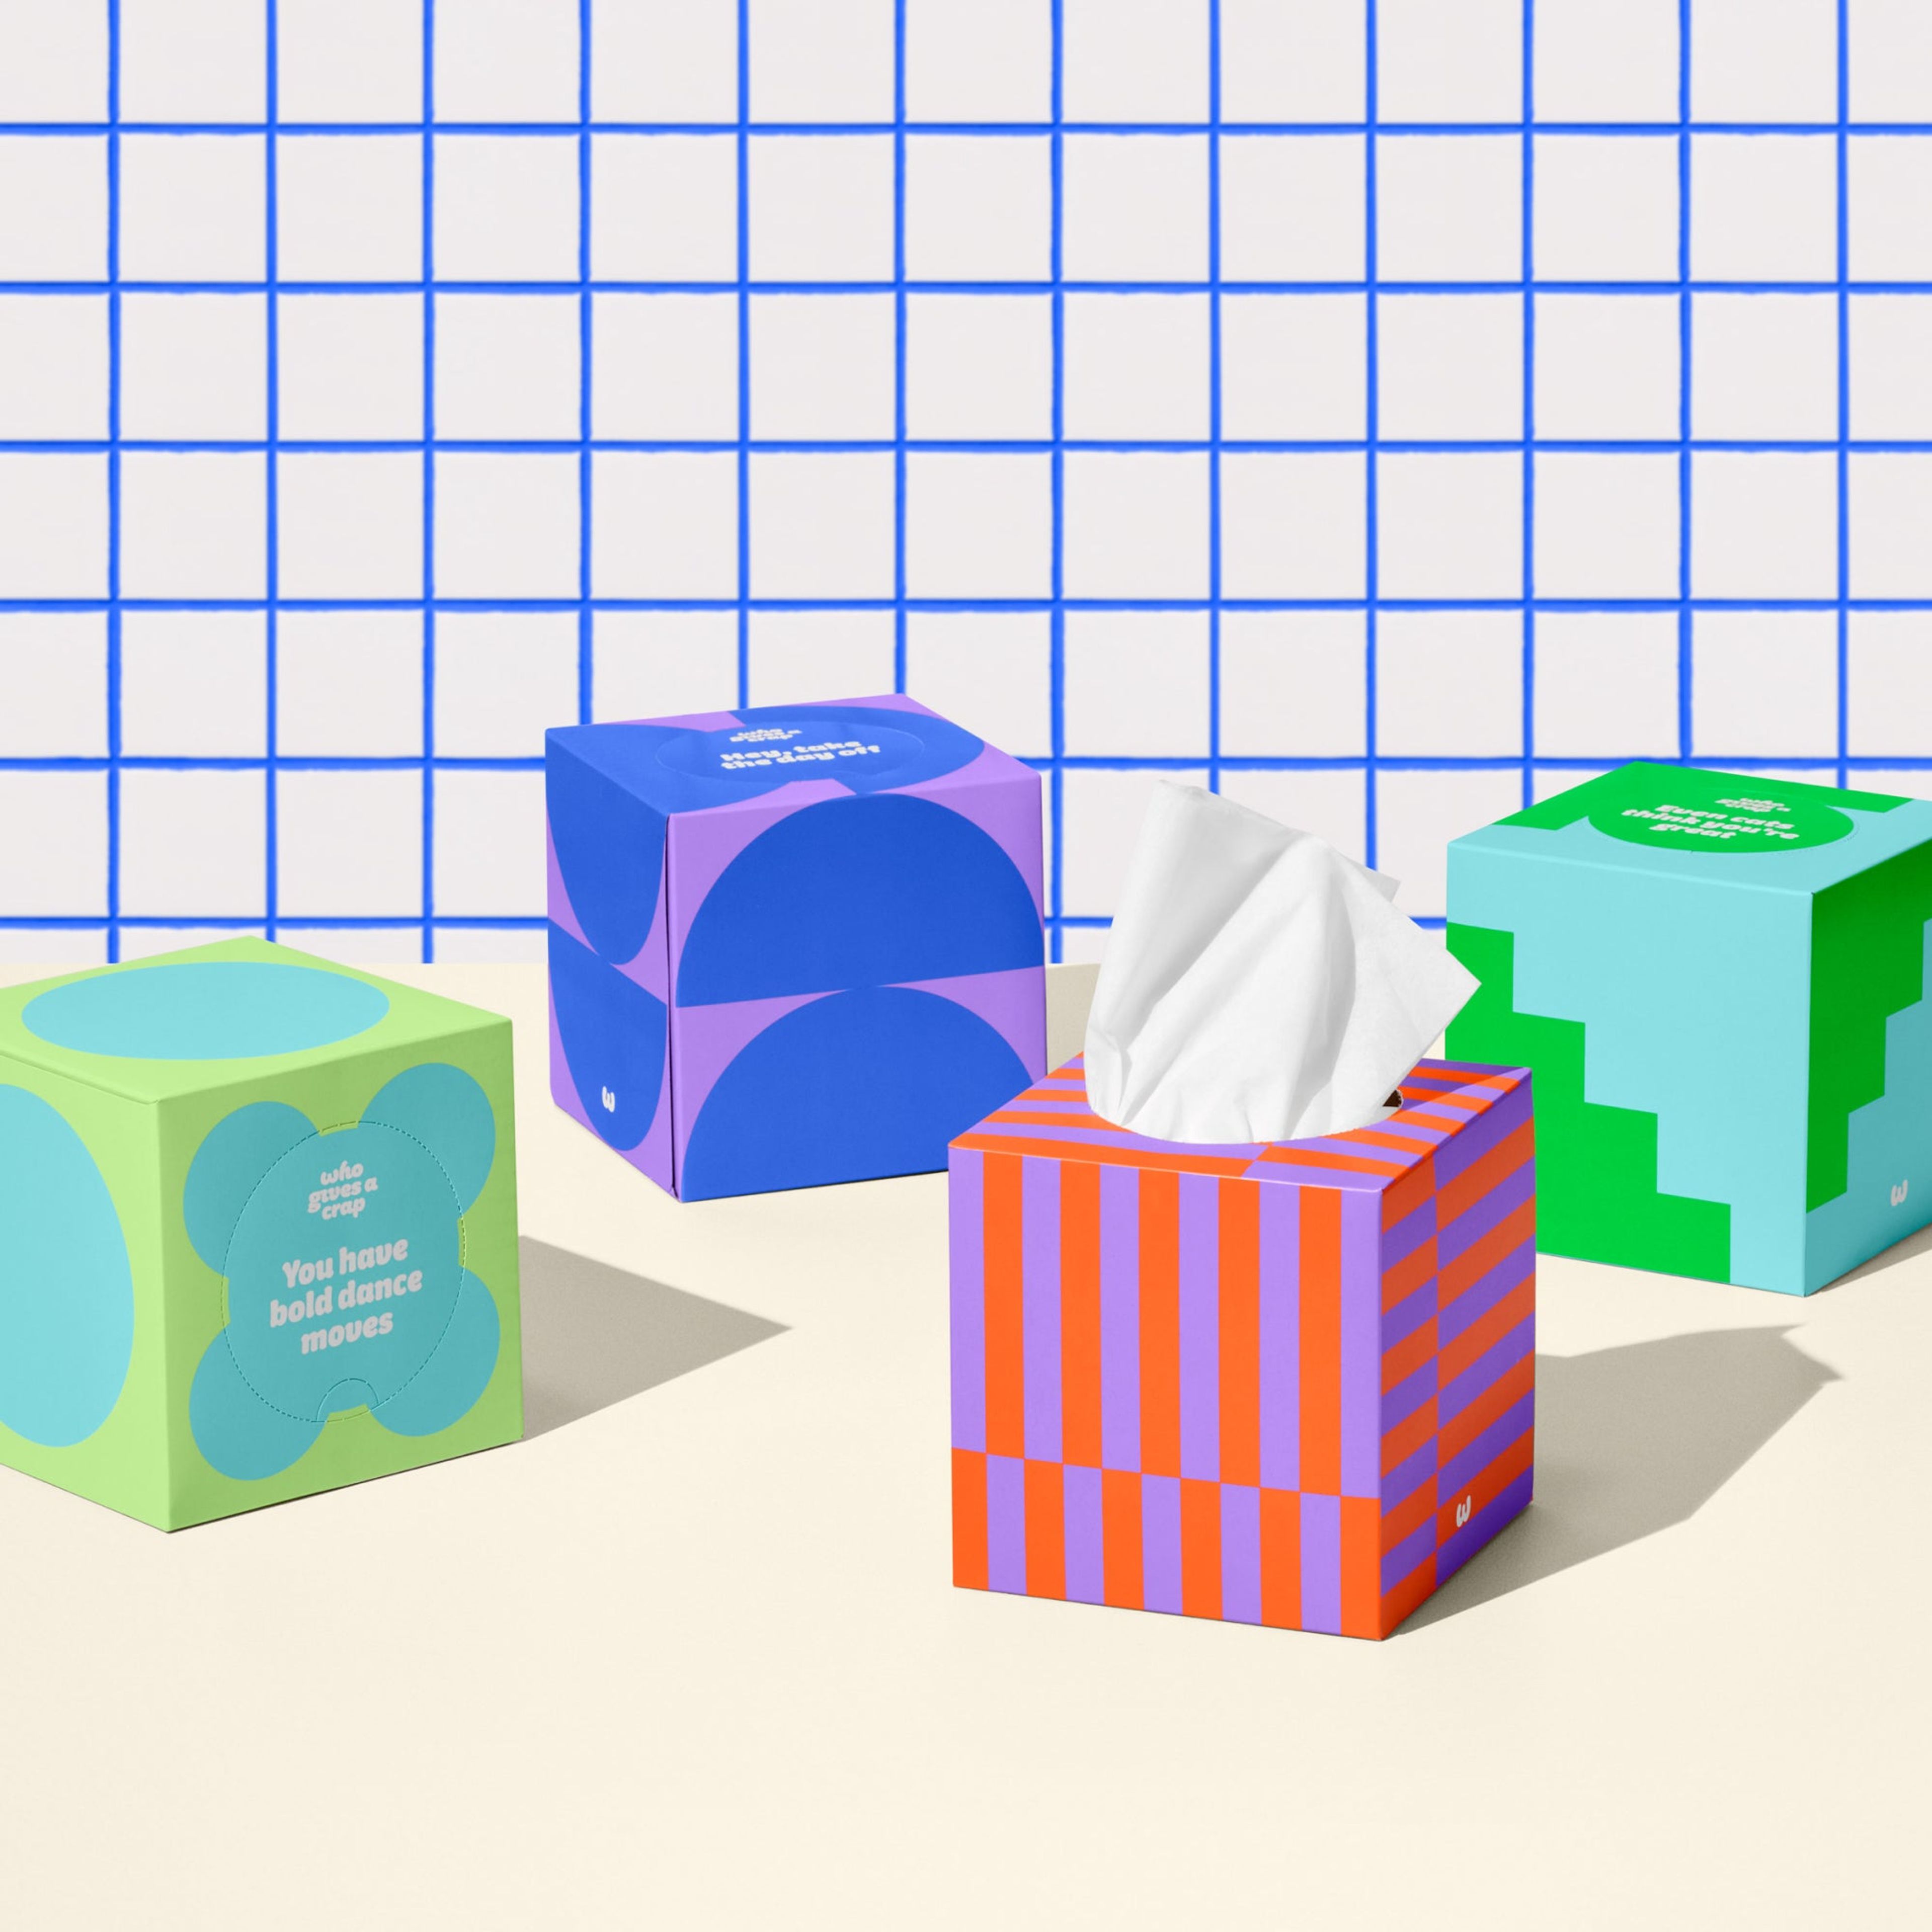 Add-On: 12 Boxes of Forest Friendly Tissues